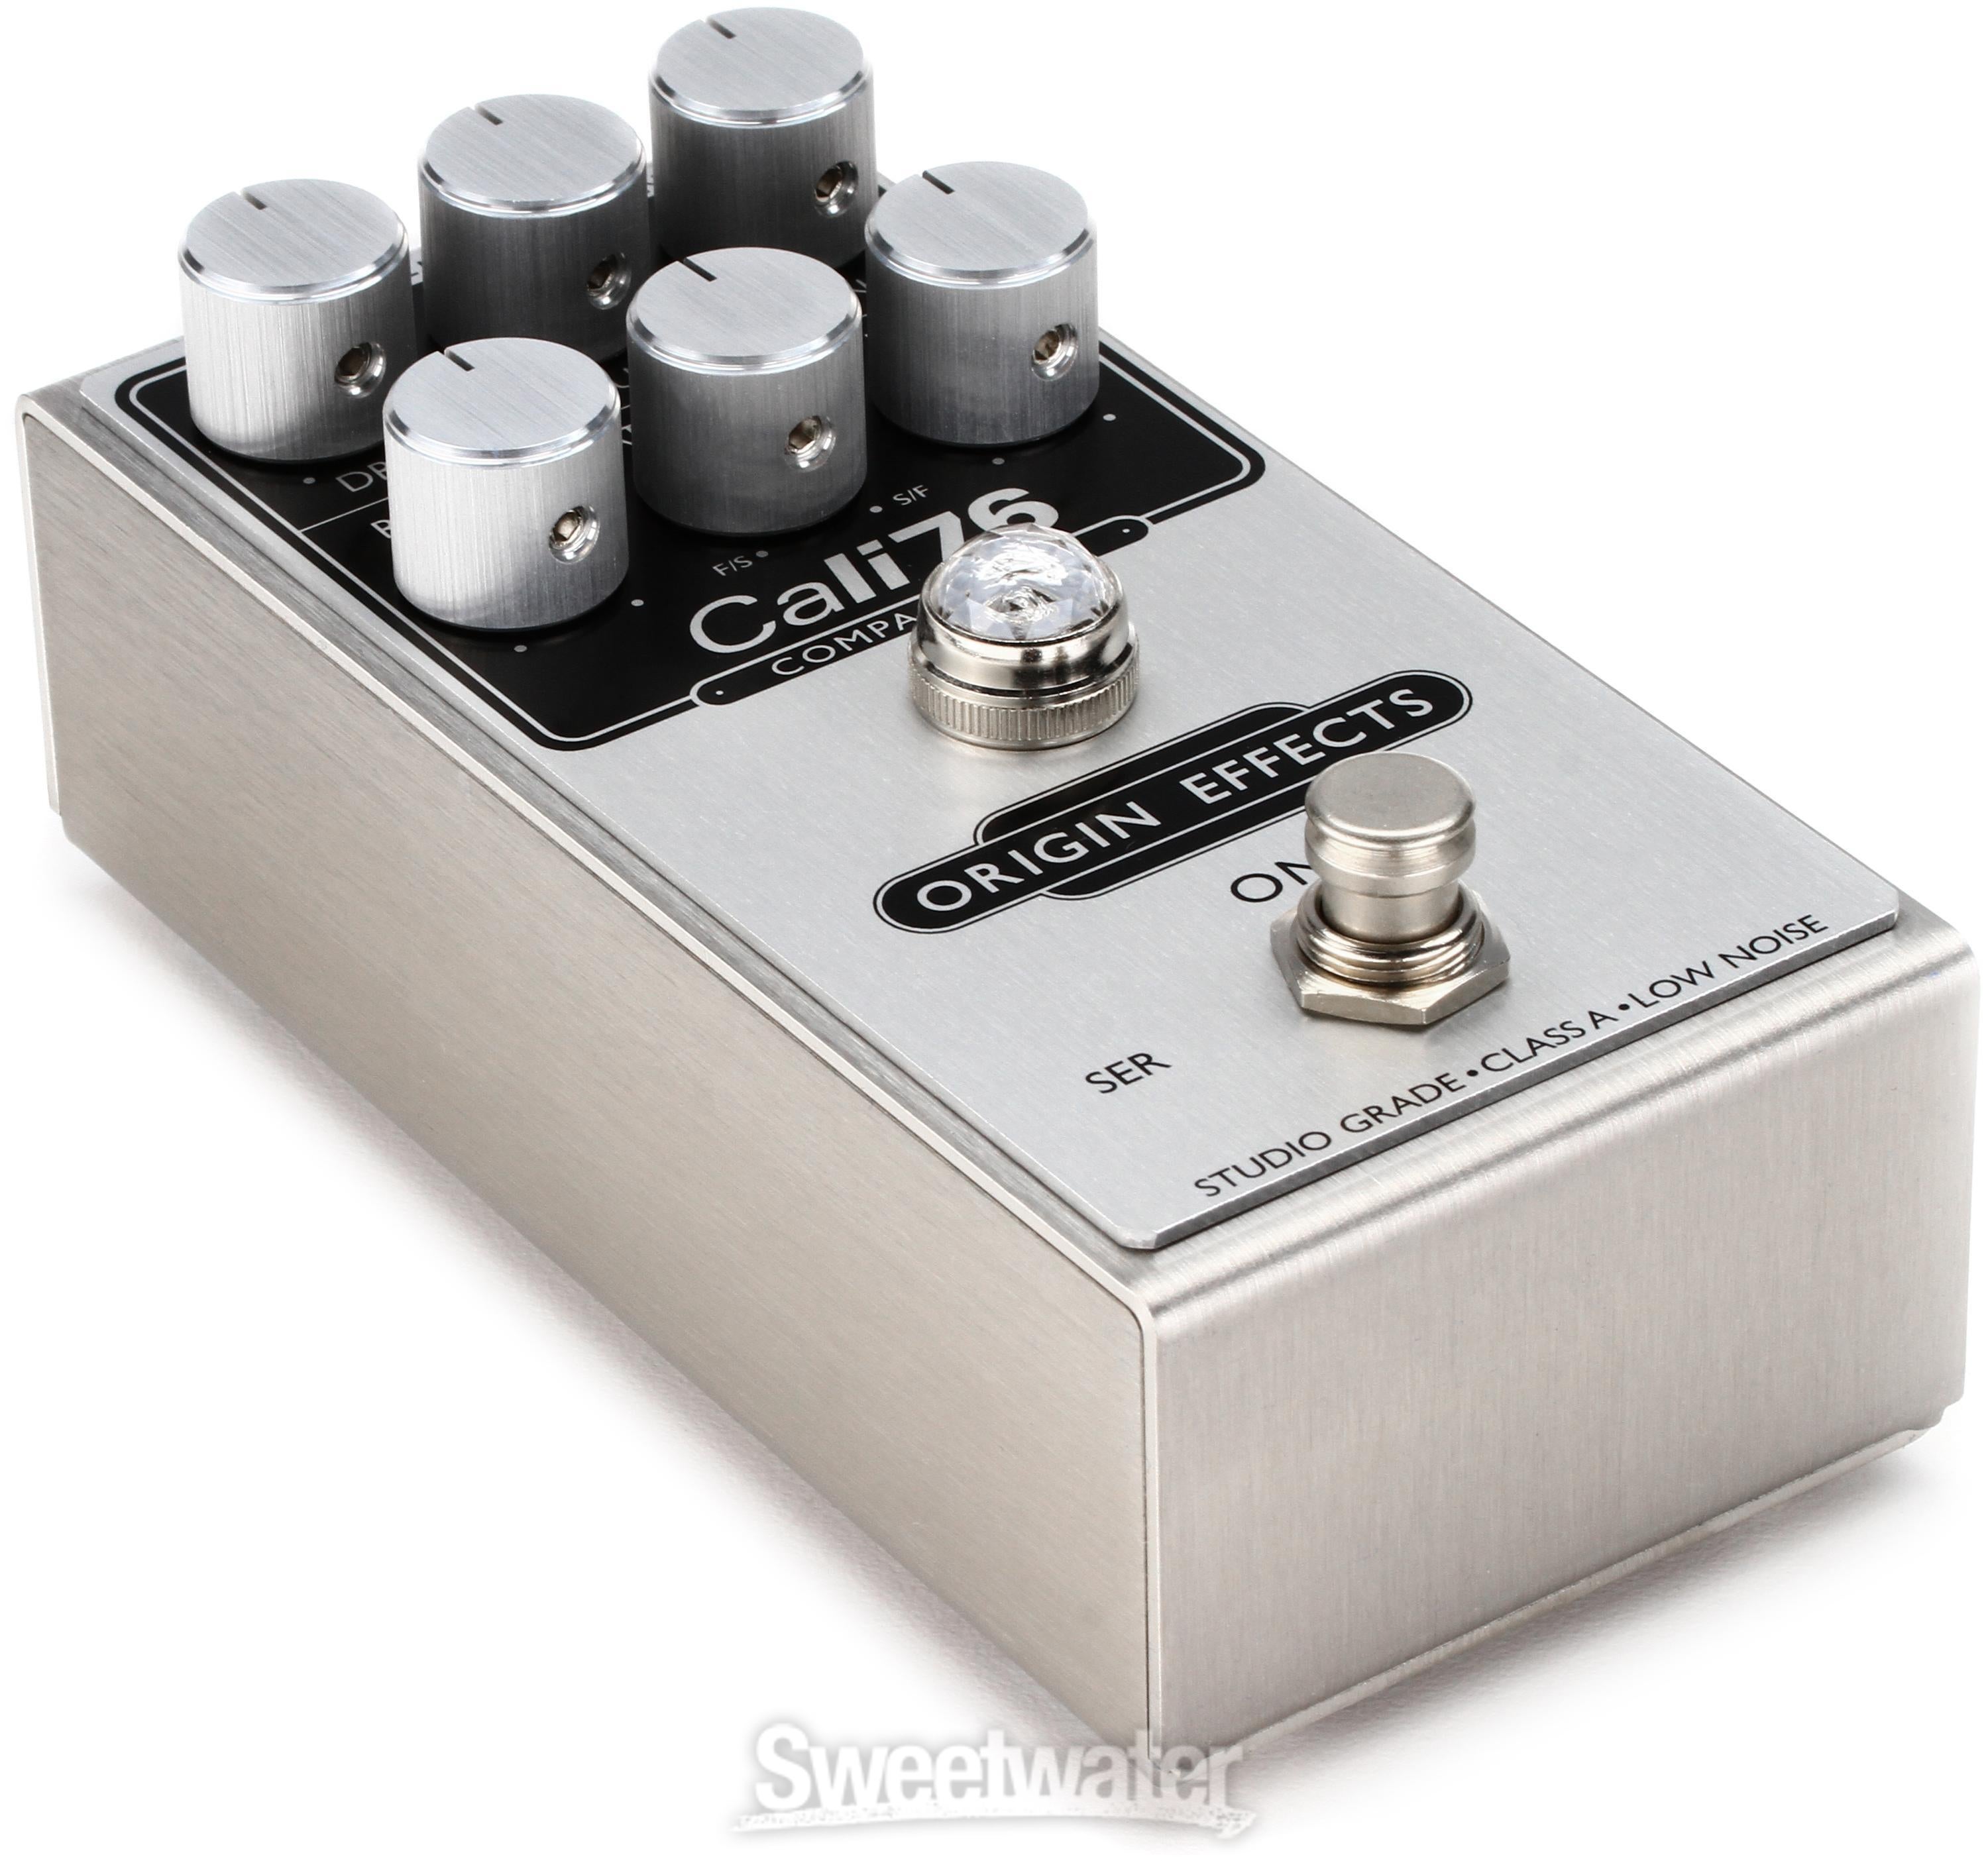 Origin Effects Cali76 Compact Bass Compressor Pedal | Sweetwater